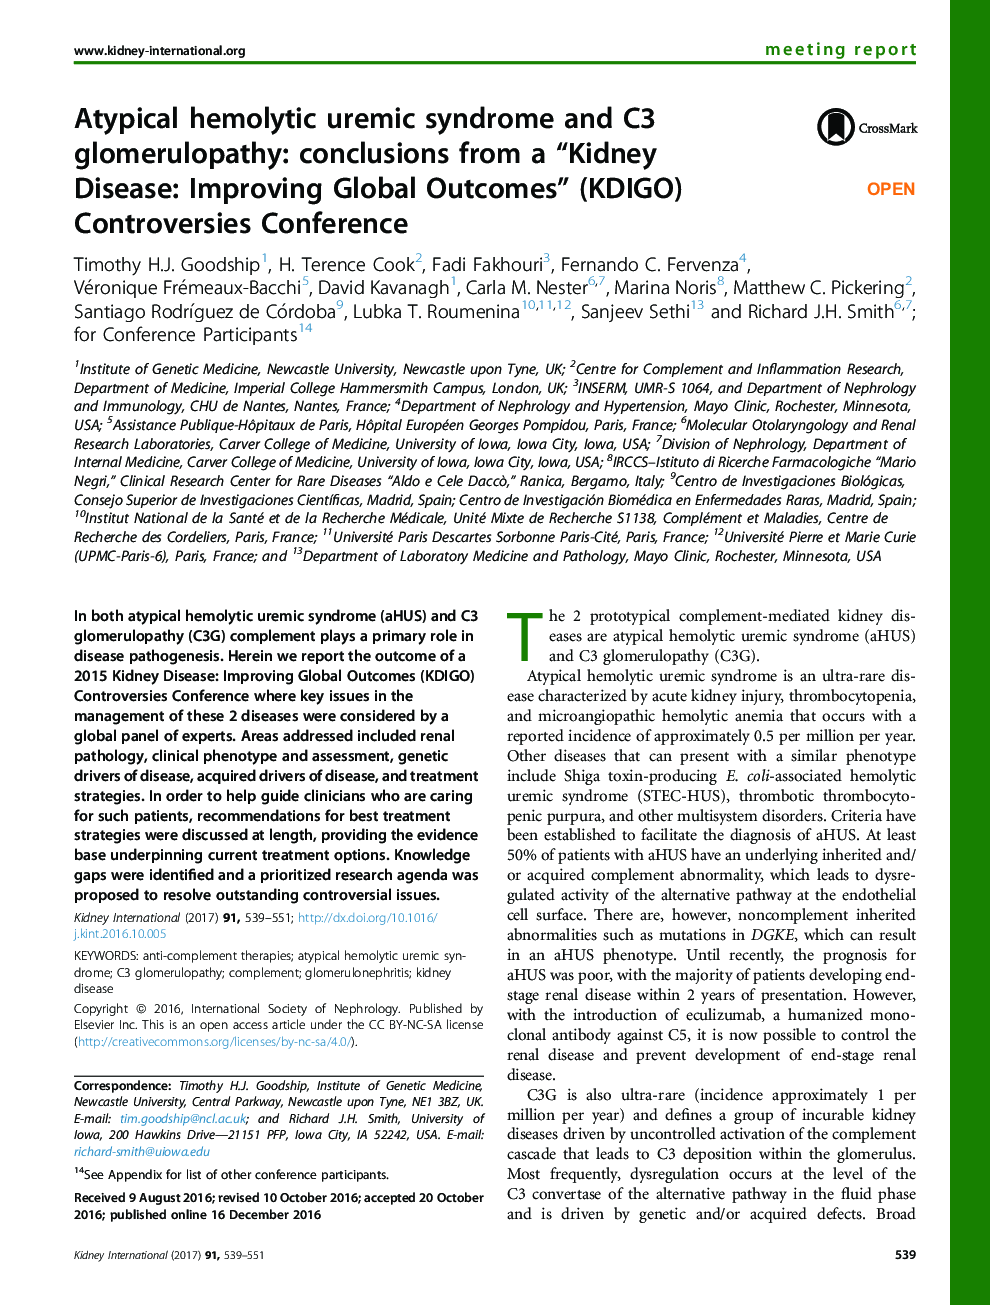 Atypical hemolytic uremic syndrome and C3 glomerulopathy: conclusions from a “Kidney Disease: Improving Global Outcomes” (KDIGO) Controversies Conference